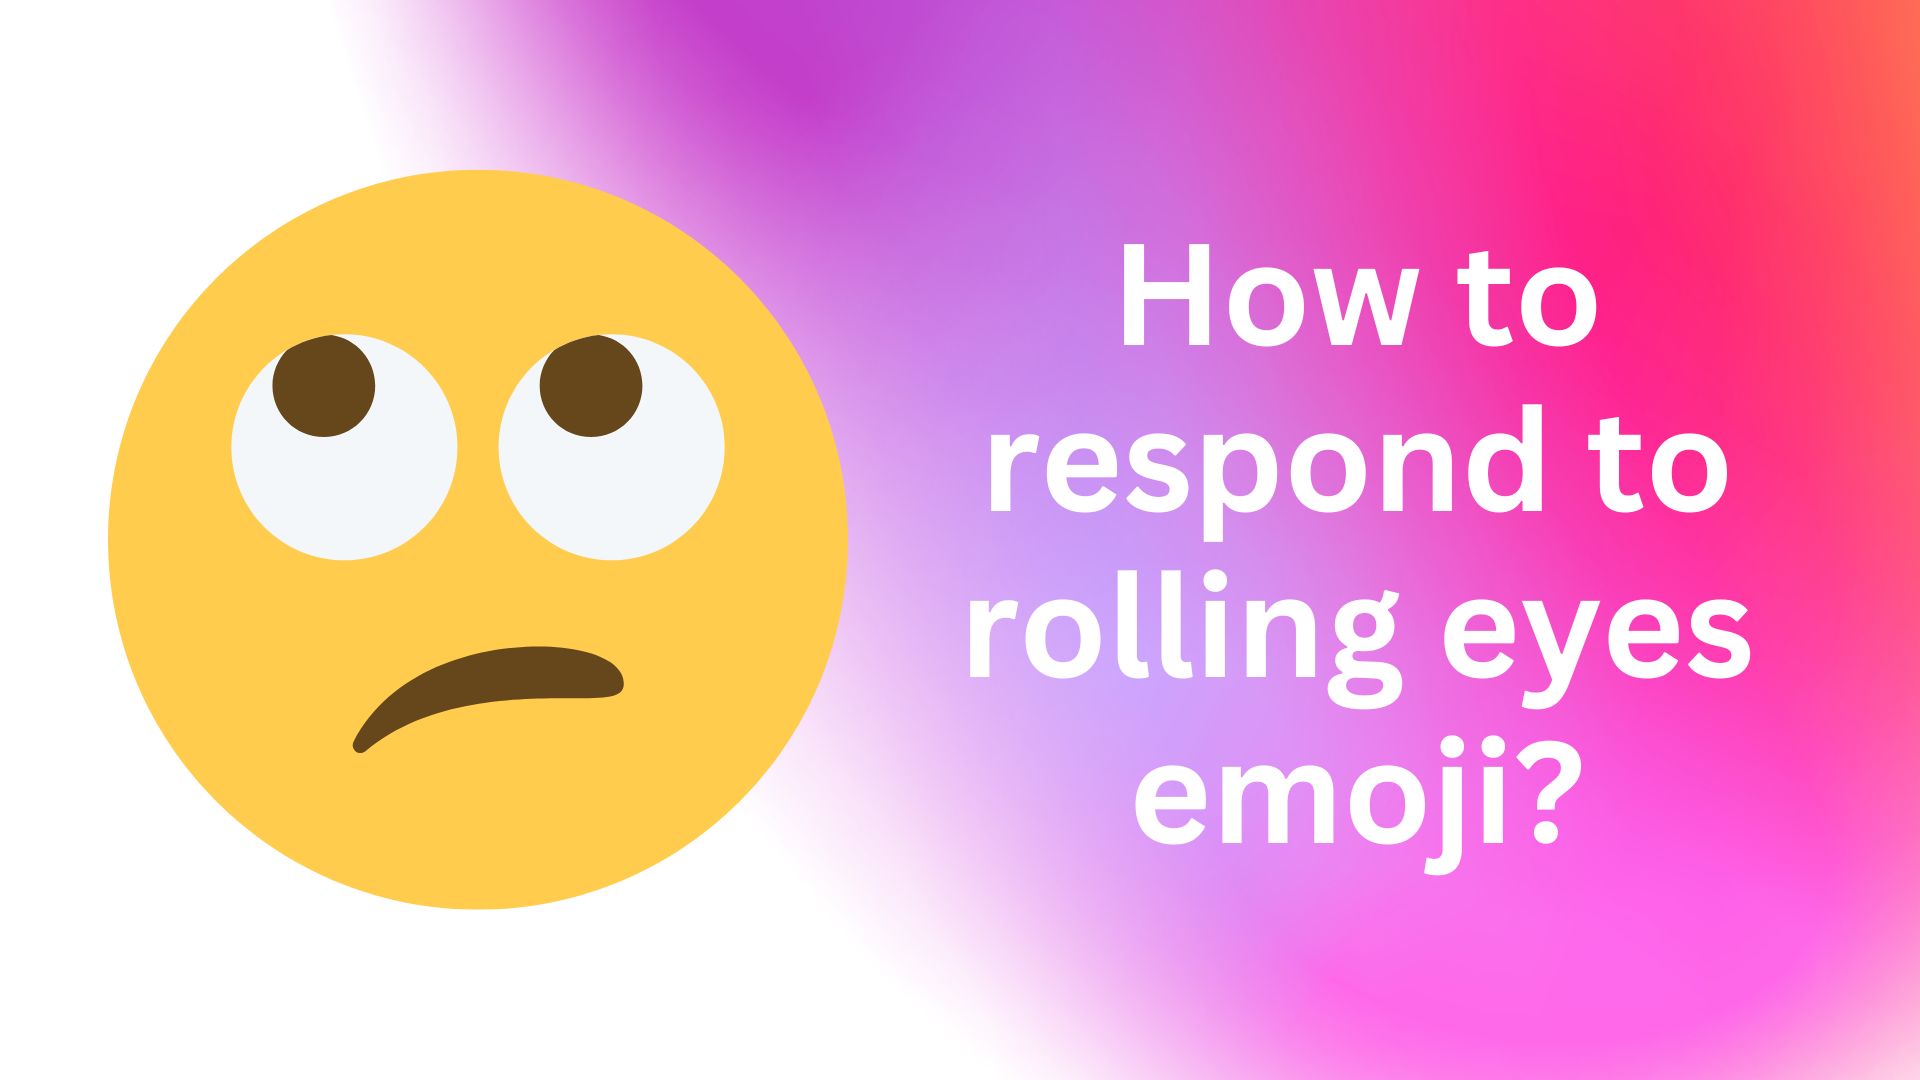 How to respond to rolling eyes emoji